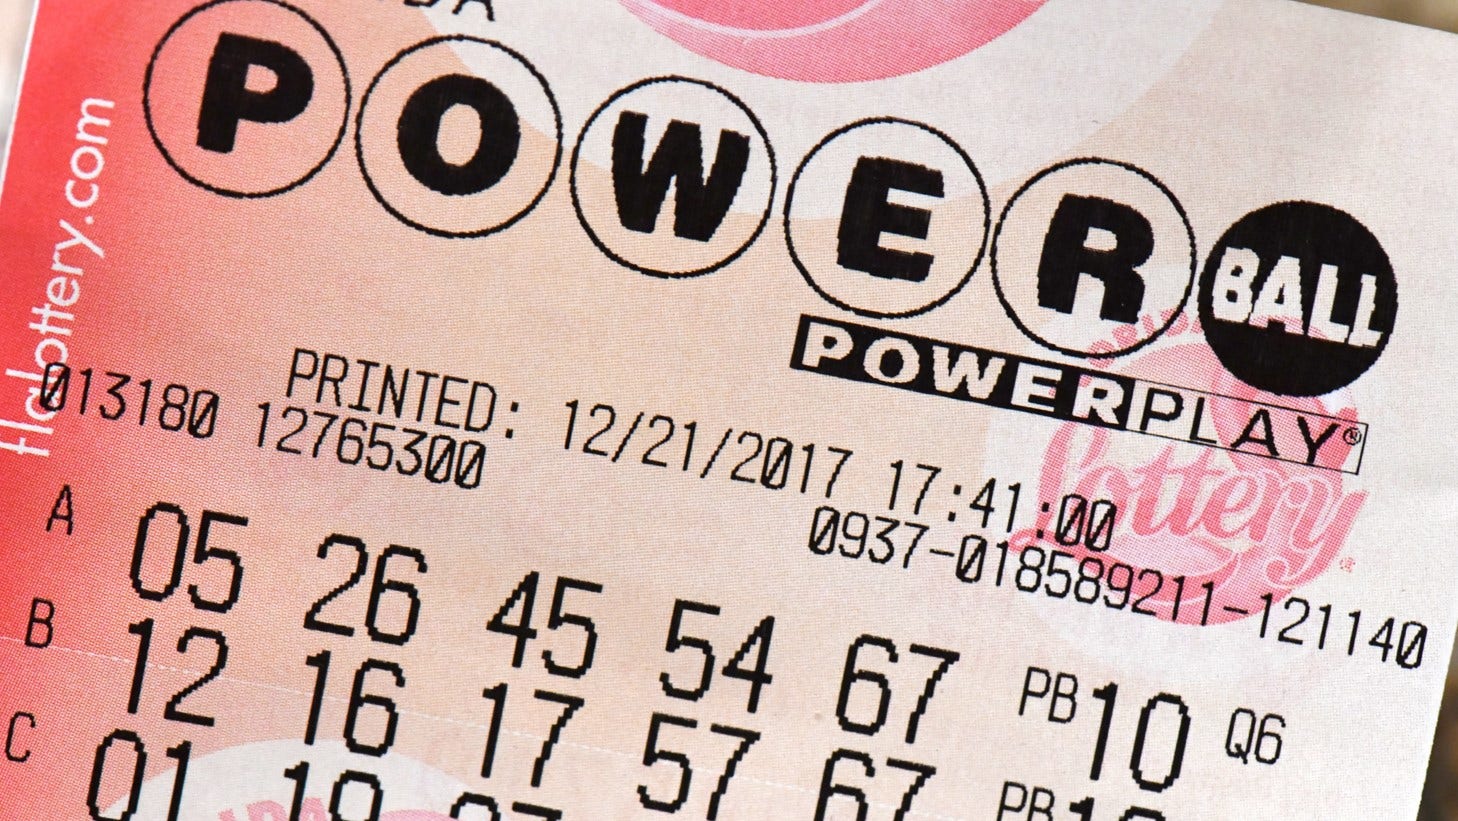 10 Things You Can Buy With Powerball Jackpot After Taxes: SPY, Crypto, Teslas, Real Estate, Sports Teams And More